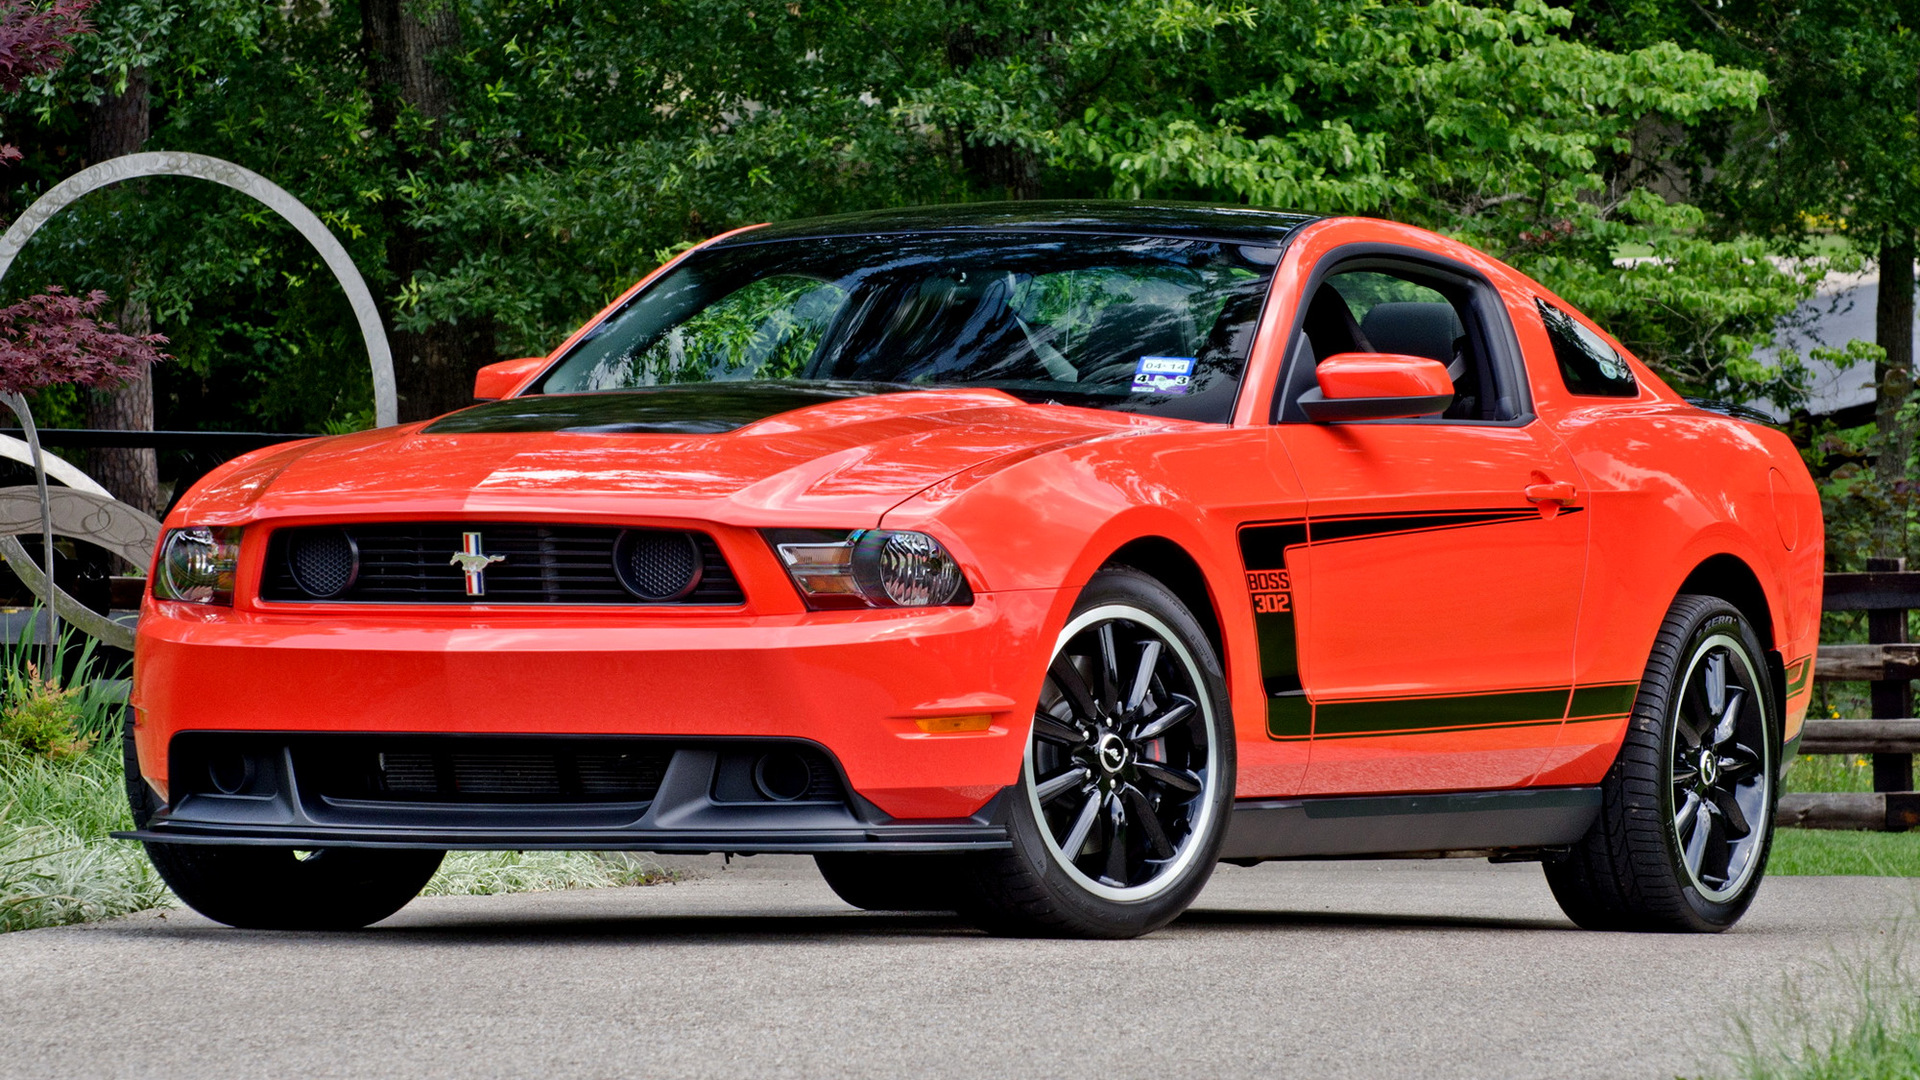 Download Car Coupé Muscle Car Vehicle Ford Mustang Boss 302 Hd Wallpaper